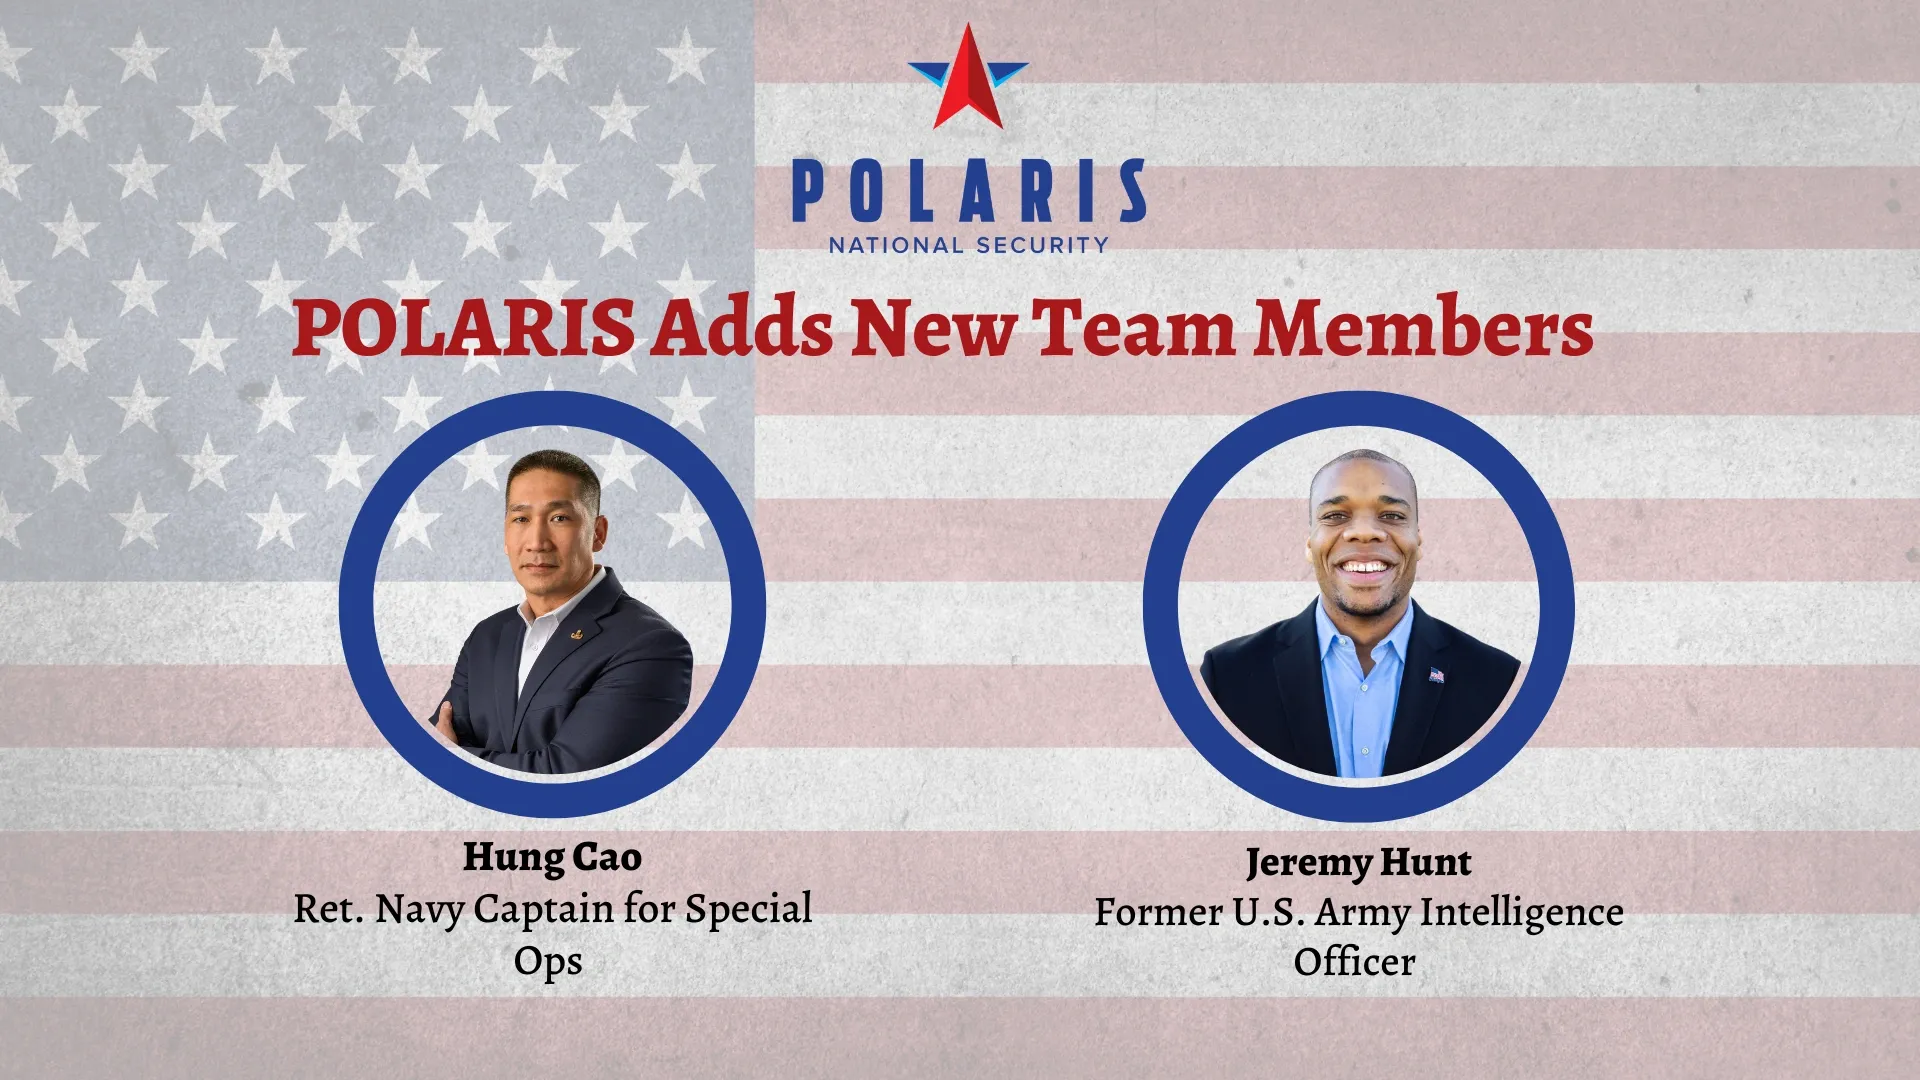 POLARIS Adds Key Members to Its National Security Team